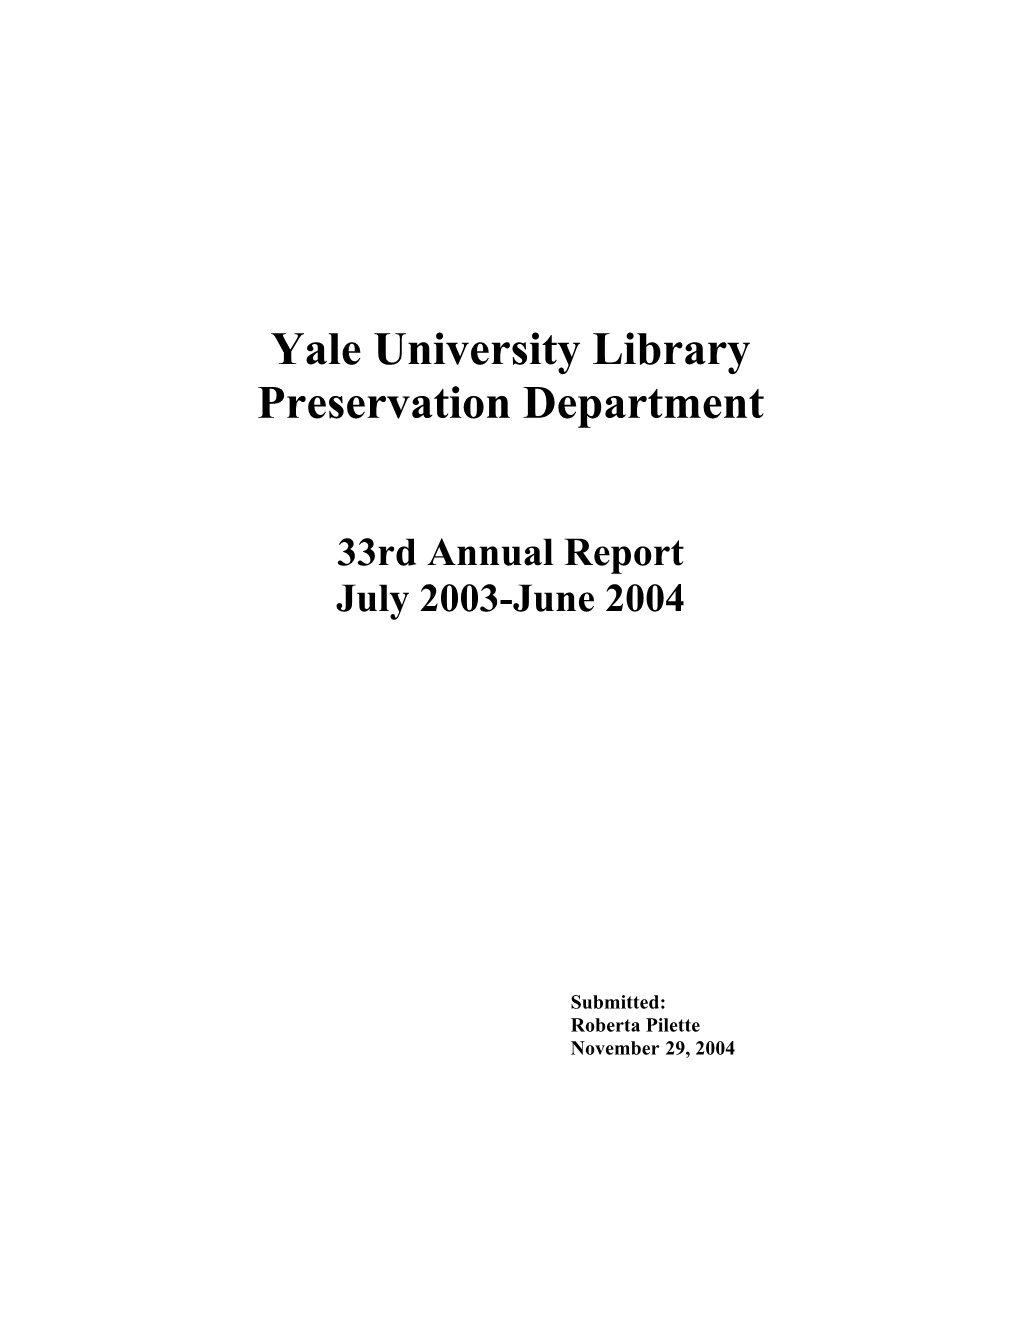 Yale University Library Preservation Department